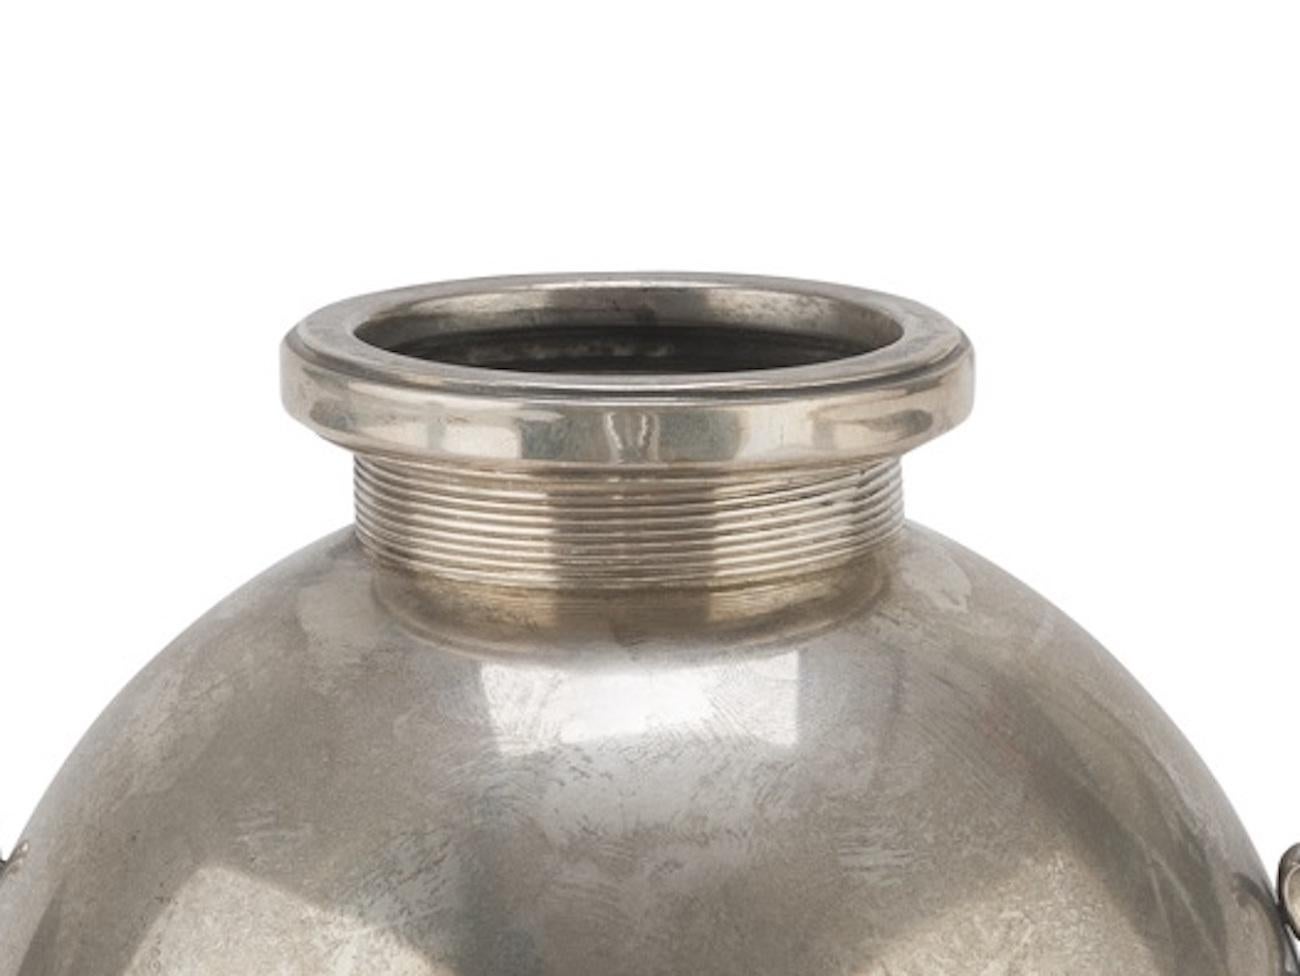 Mid-Century Modern Vintage Silver Ball Jar, Made in Italy, by Ricci & Co., 1944 For Sale